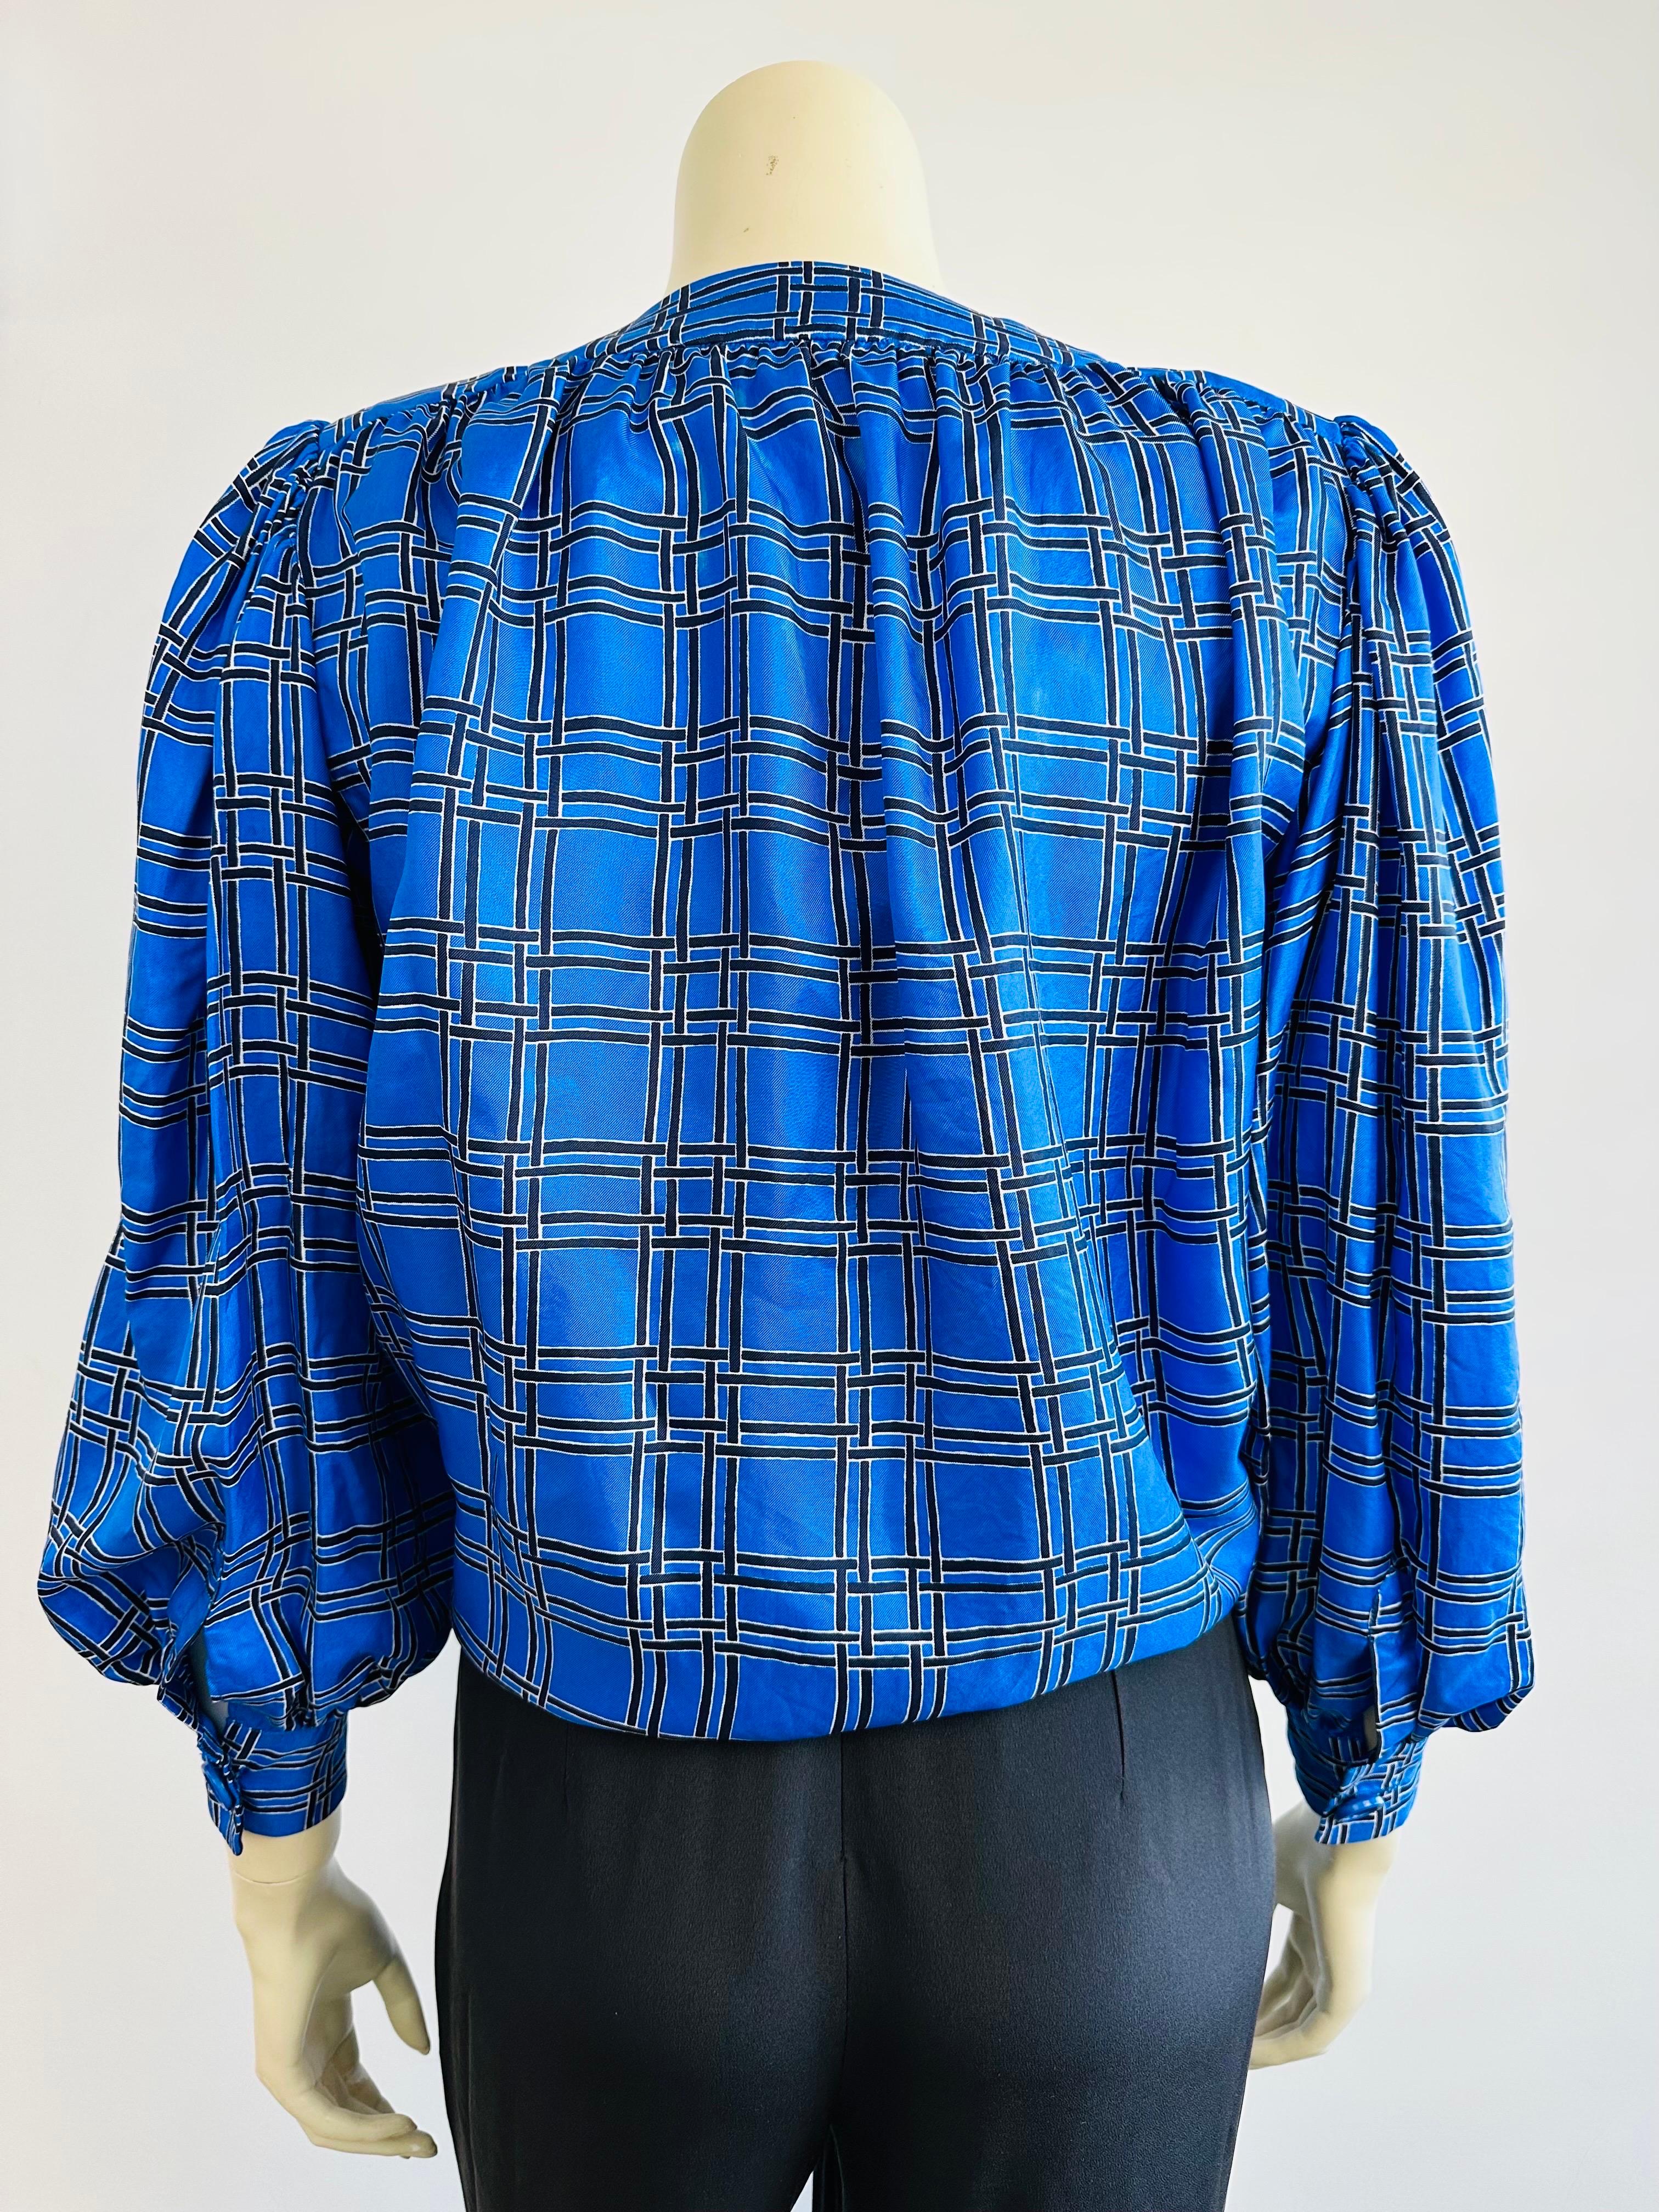 YSL Yves saint Laurent royal blue silk blouse from the 1970s For Sale 1